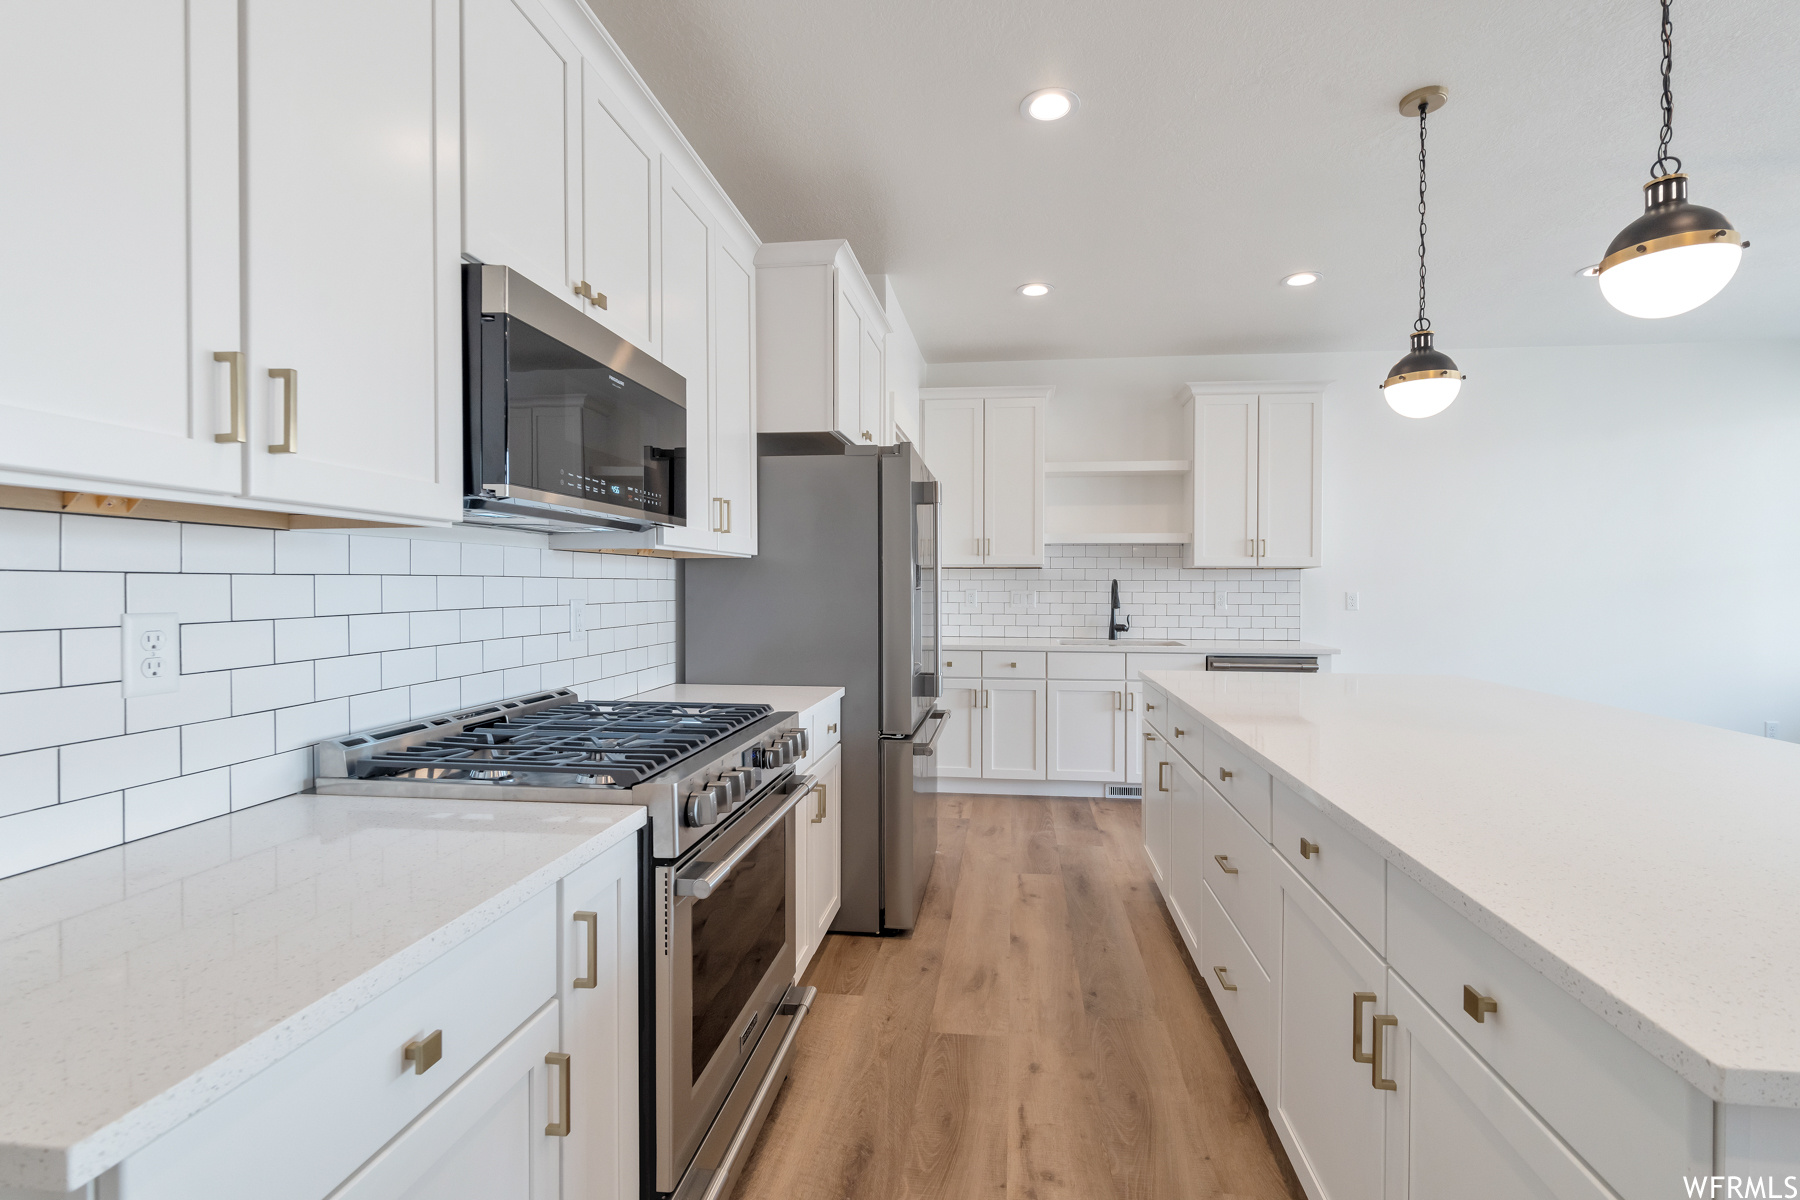 Kitchen with microwave, gas range oven, light countertops, white cabinets, light parquet floors, and pendant lighting